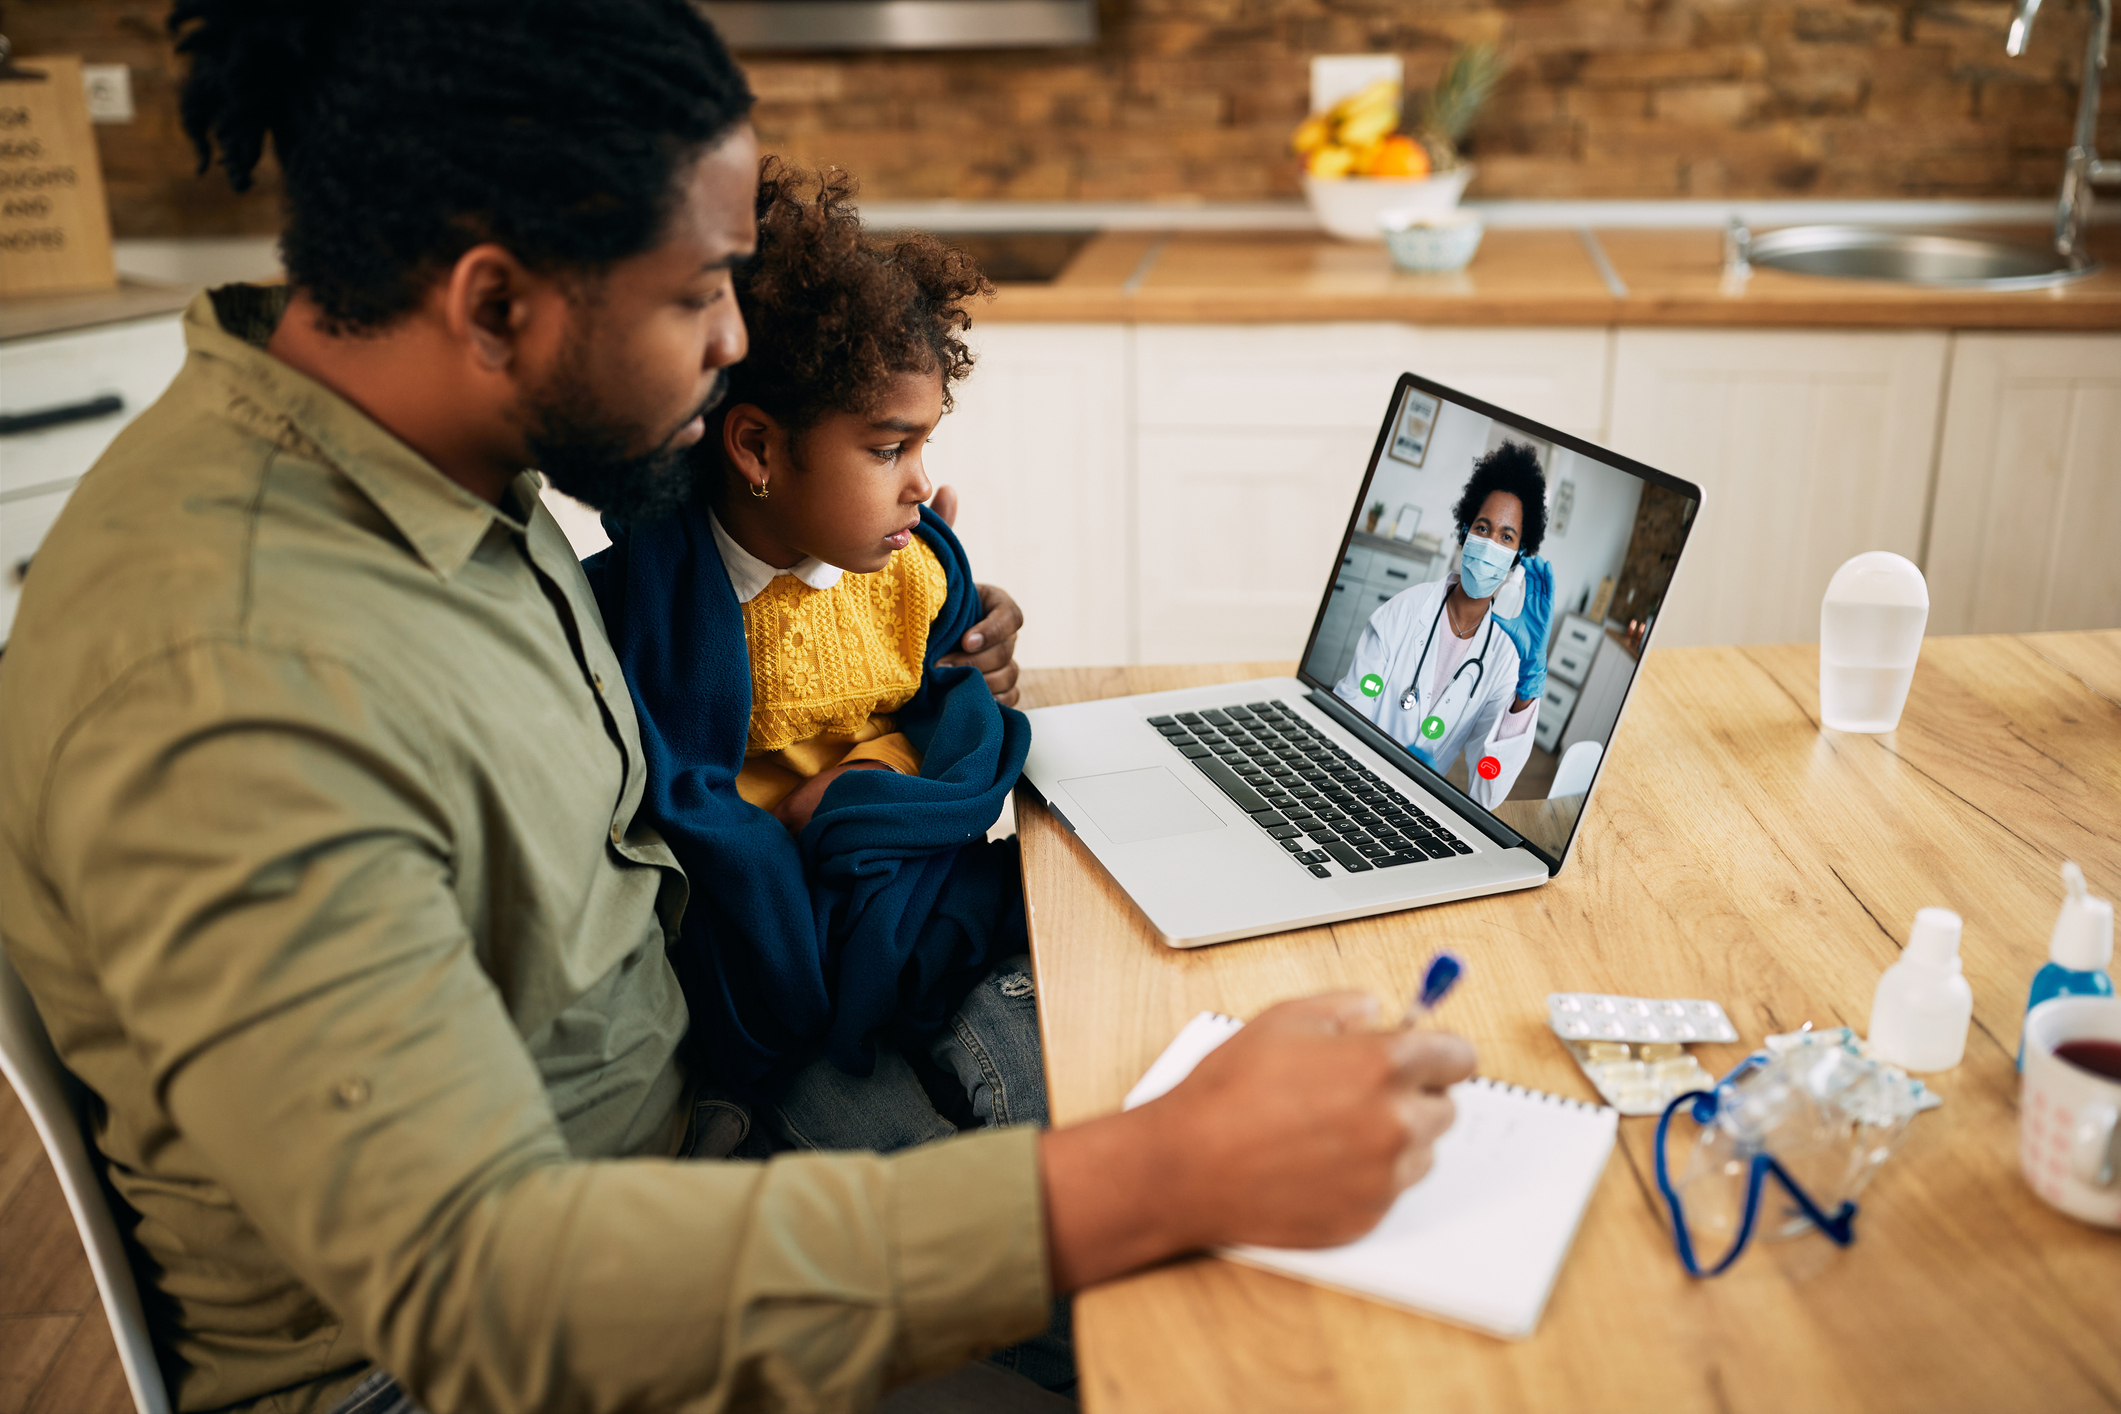 Successful Telemedicine Use for Infantile Hemangiomas Evaluation During the Early COVID-19 Pandemic